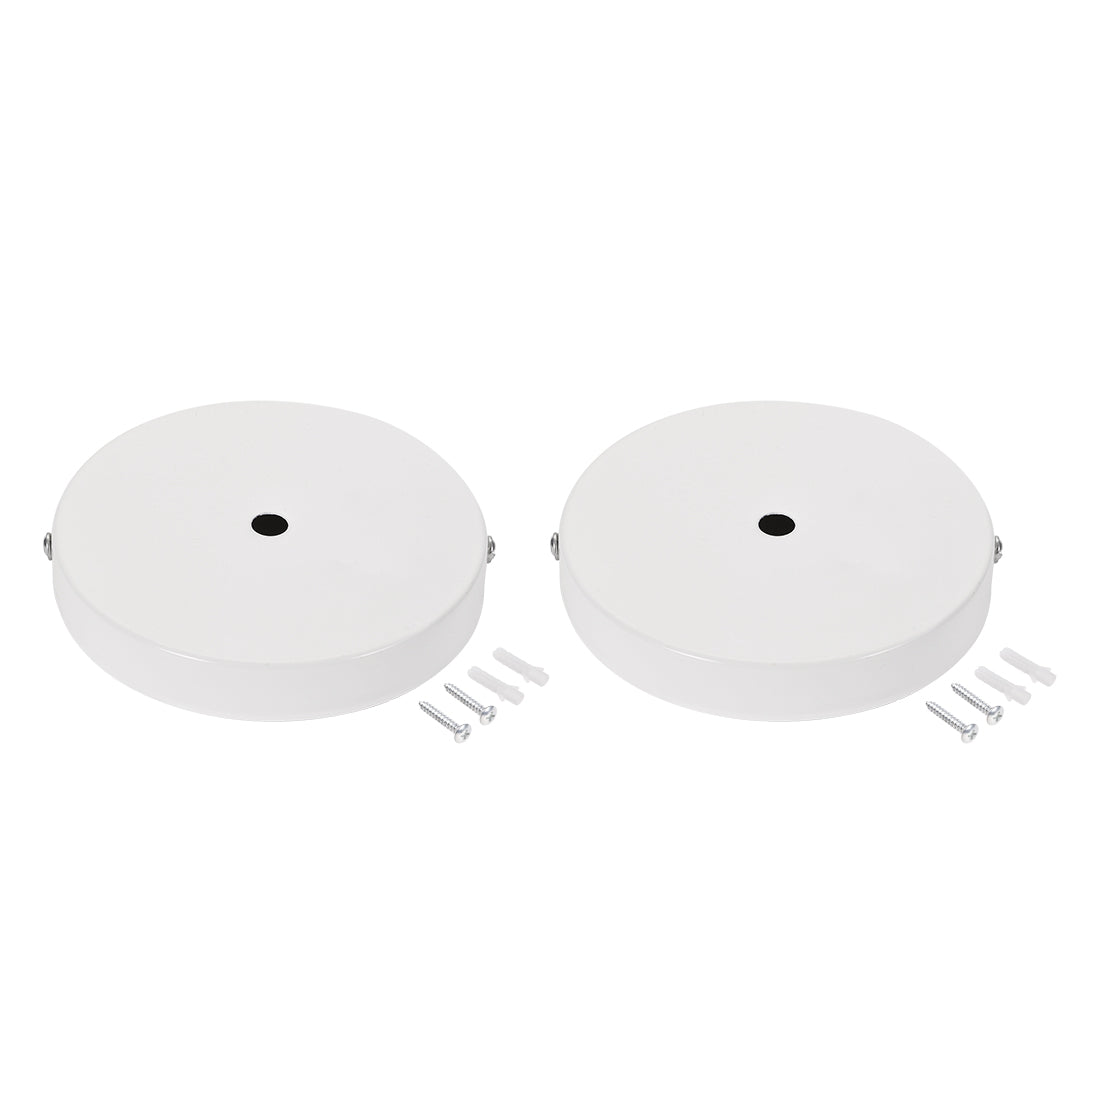 uxcell Uxcell Retro Light Canopy Kit Wall Sconce Lamp Plate Fixture 120mm 4.7Inch White 2Pcs